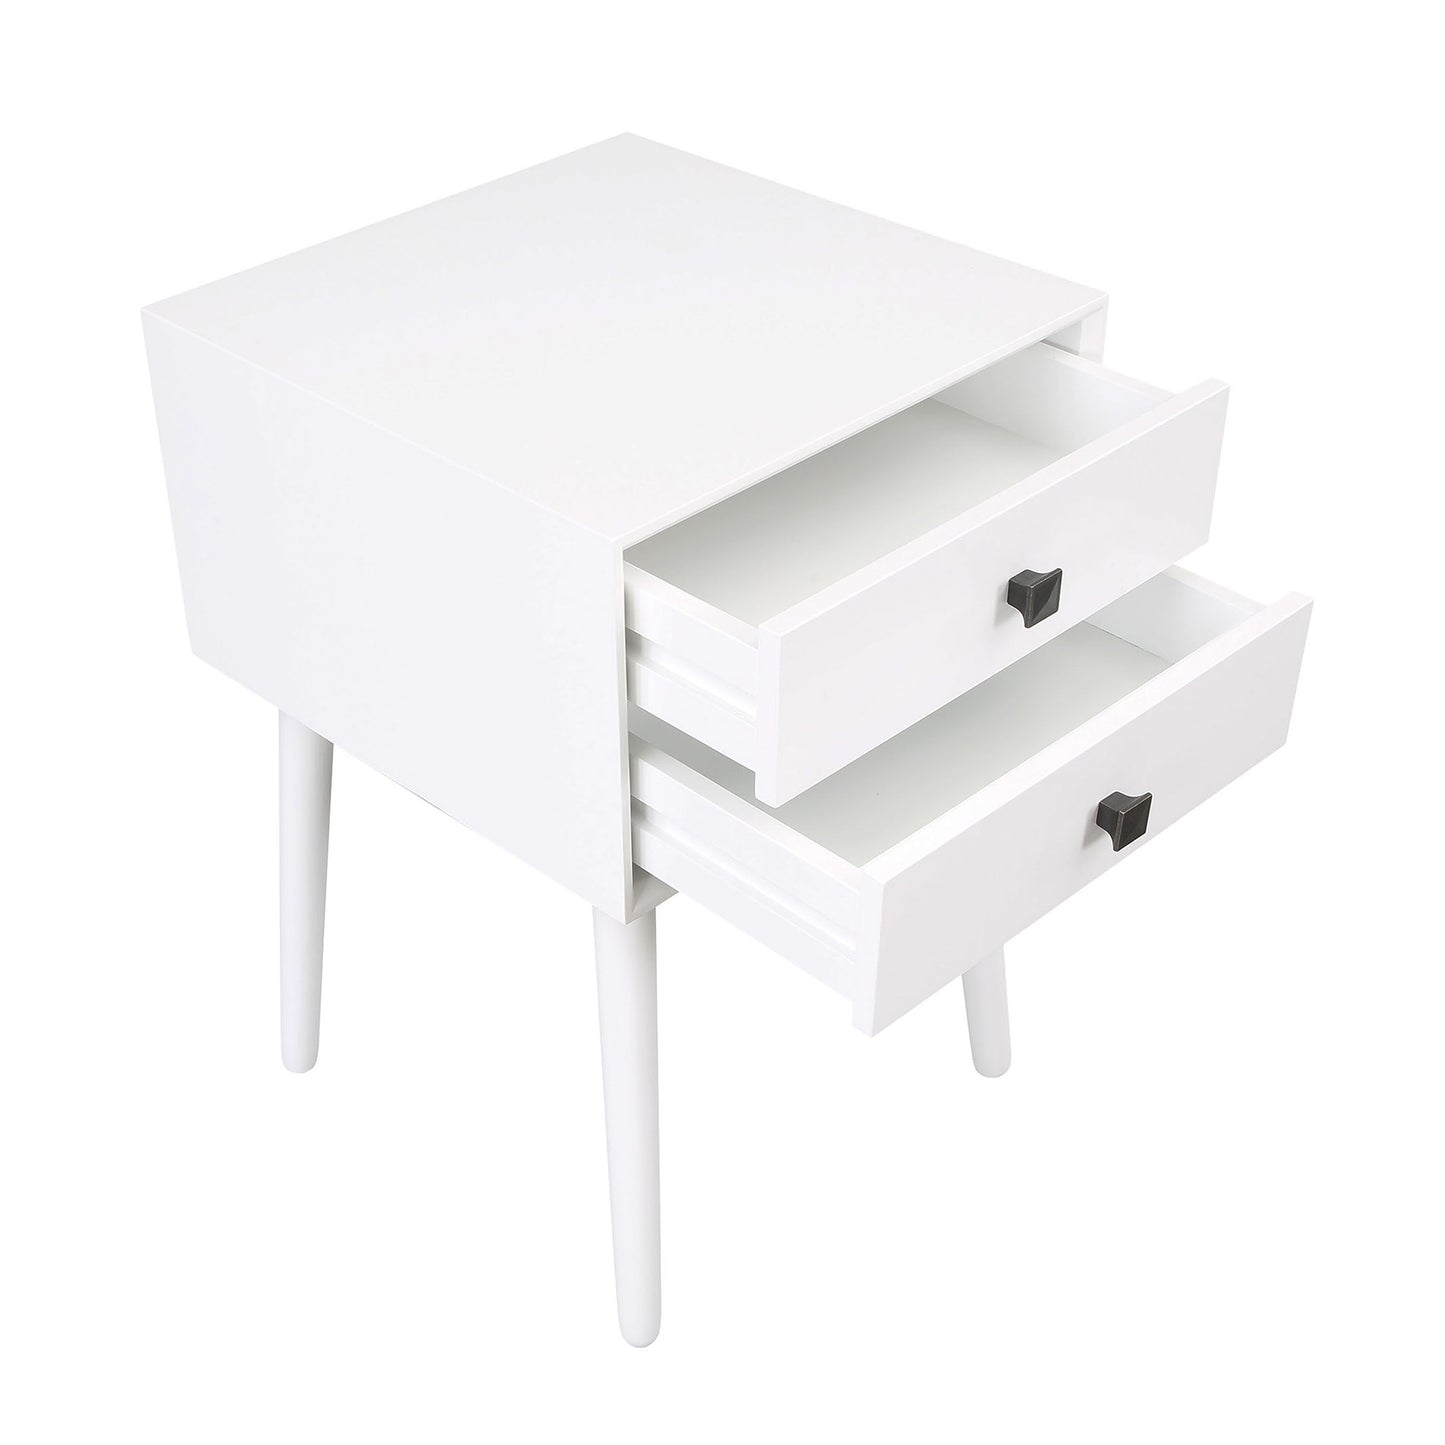 Right angled upper view of a modern white two-drawer compact nightstand with splayed legs and drawers open on a white background